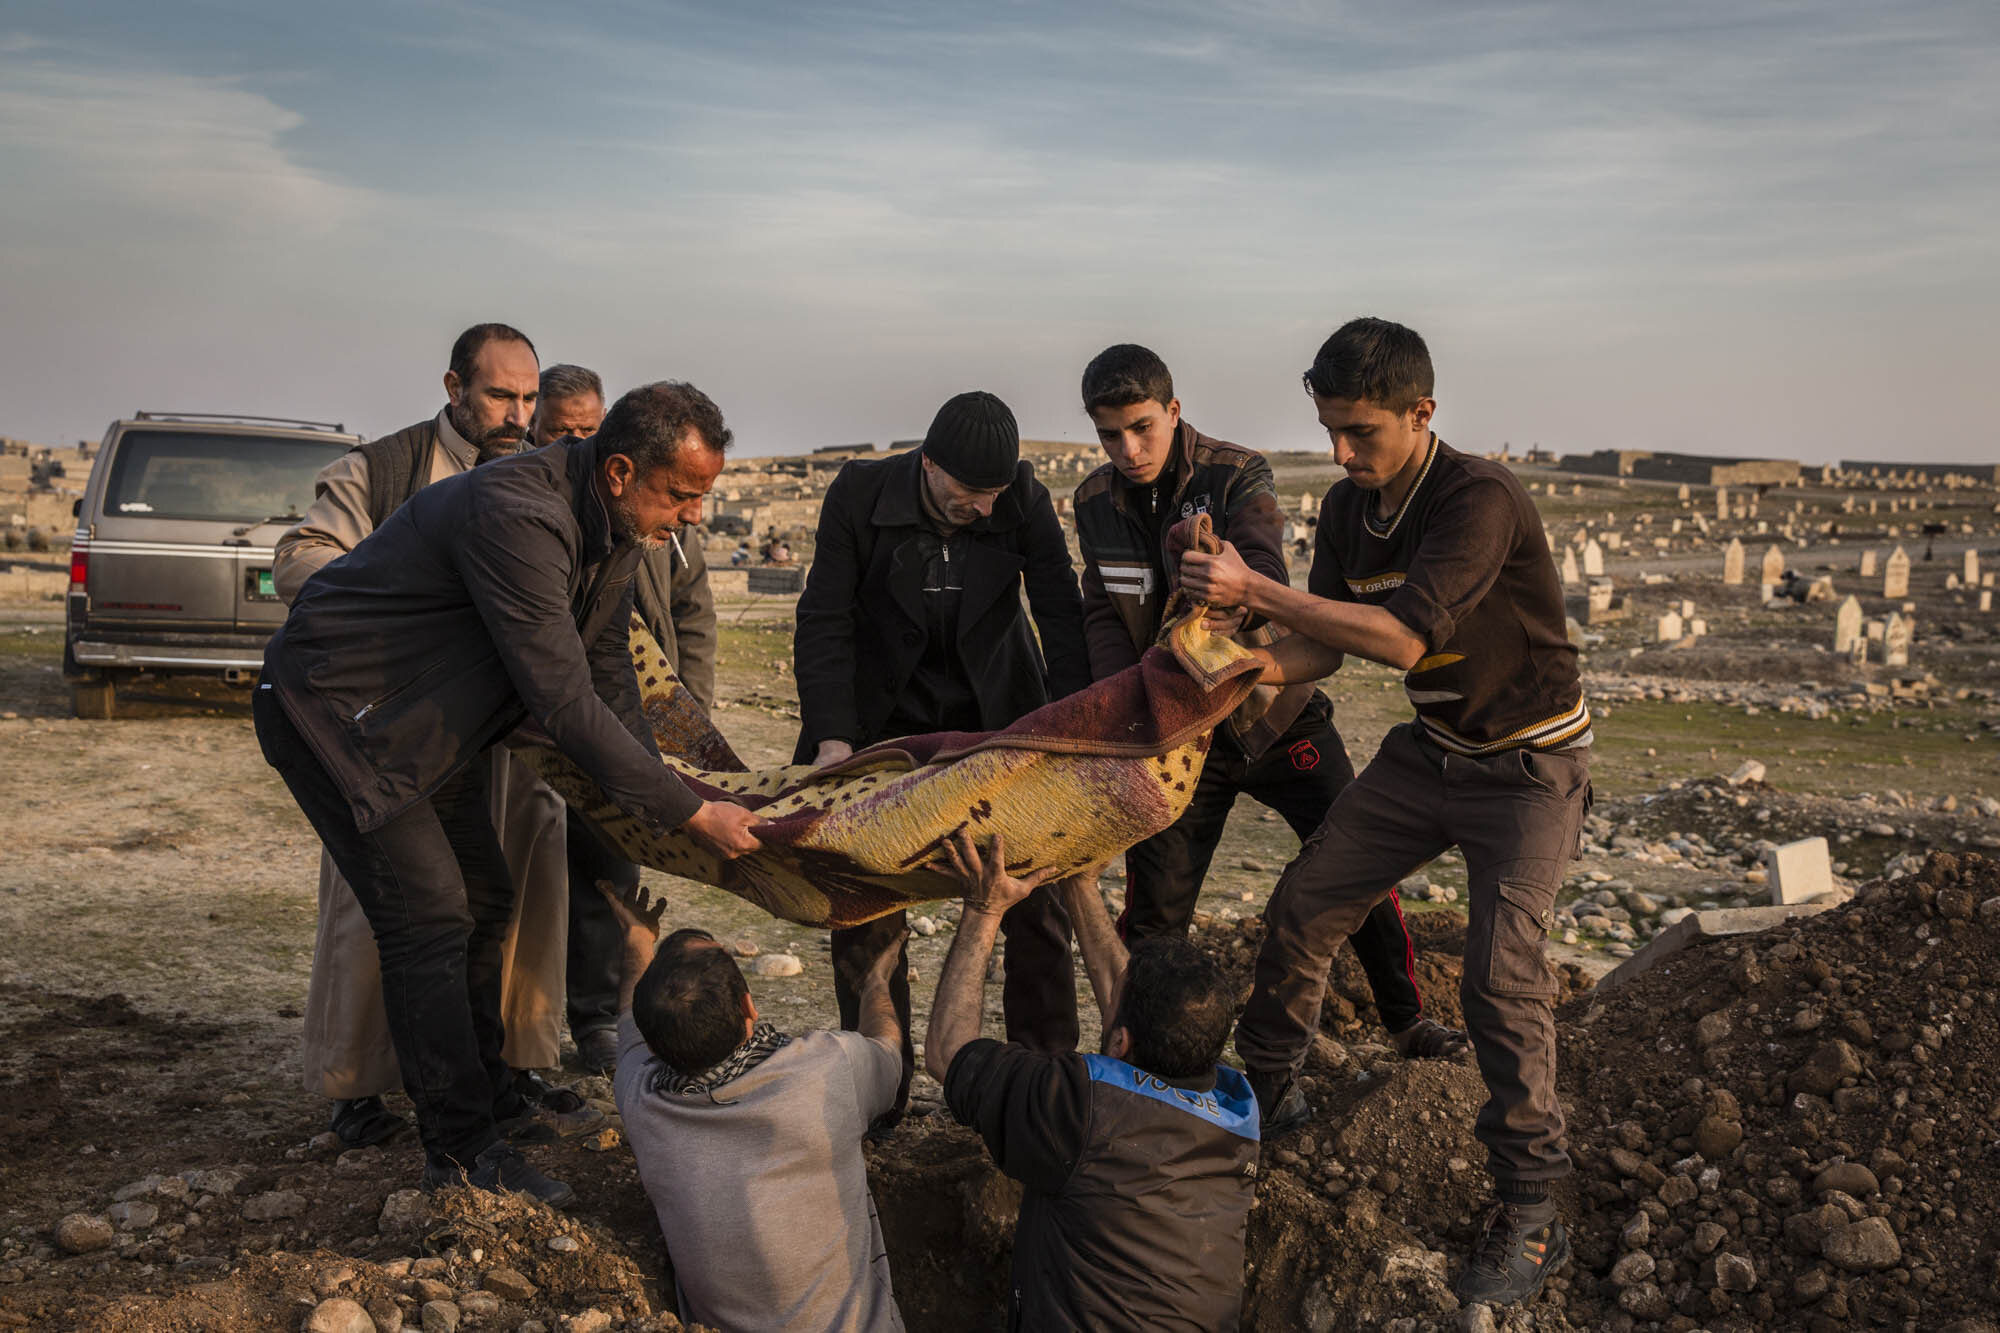  Zaid Khalid Mohammed, 16, was buried beside his father Khalid Mohammed Qassim, 42, at the cemetery in the Gogjali suburb of Mosul. They were killed earlier that day when an bomb laid by ISIS militants went off near their home in east Mosul. Iraq - J